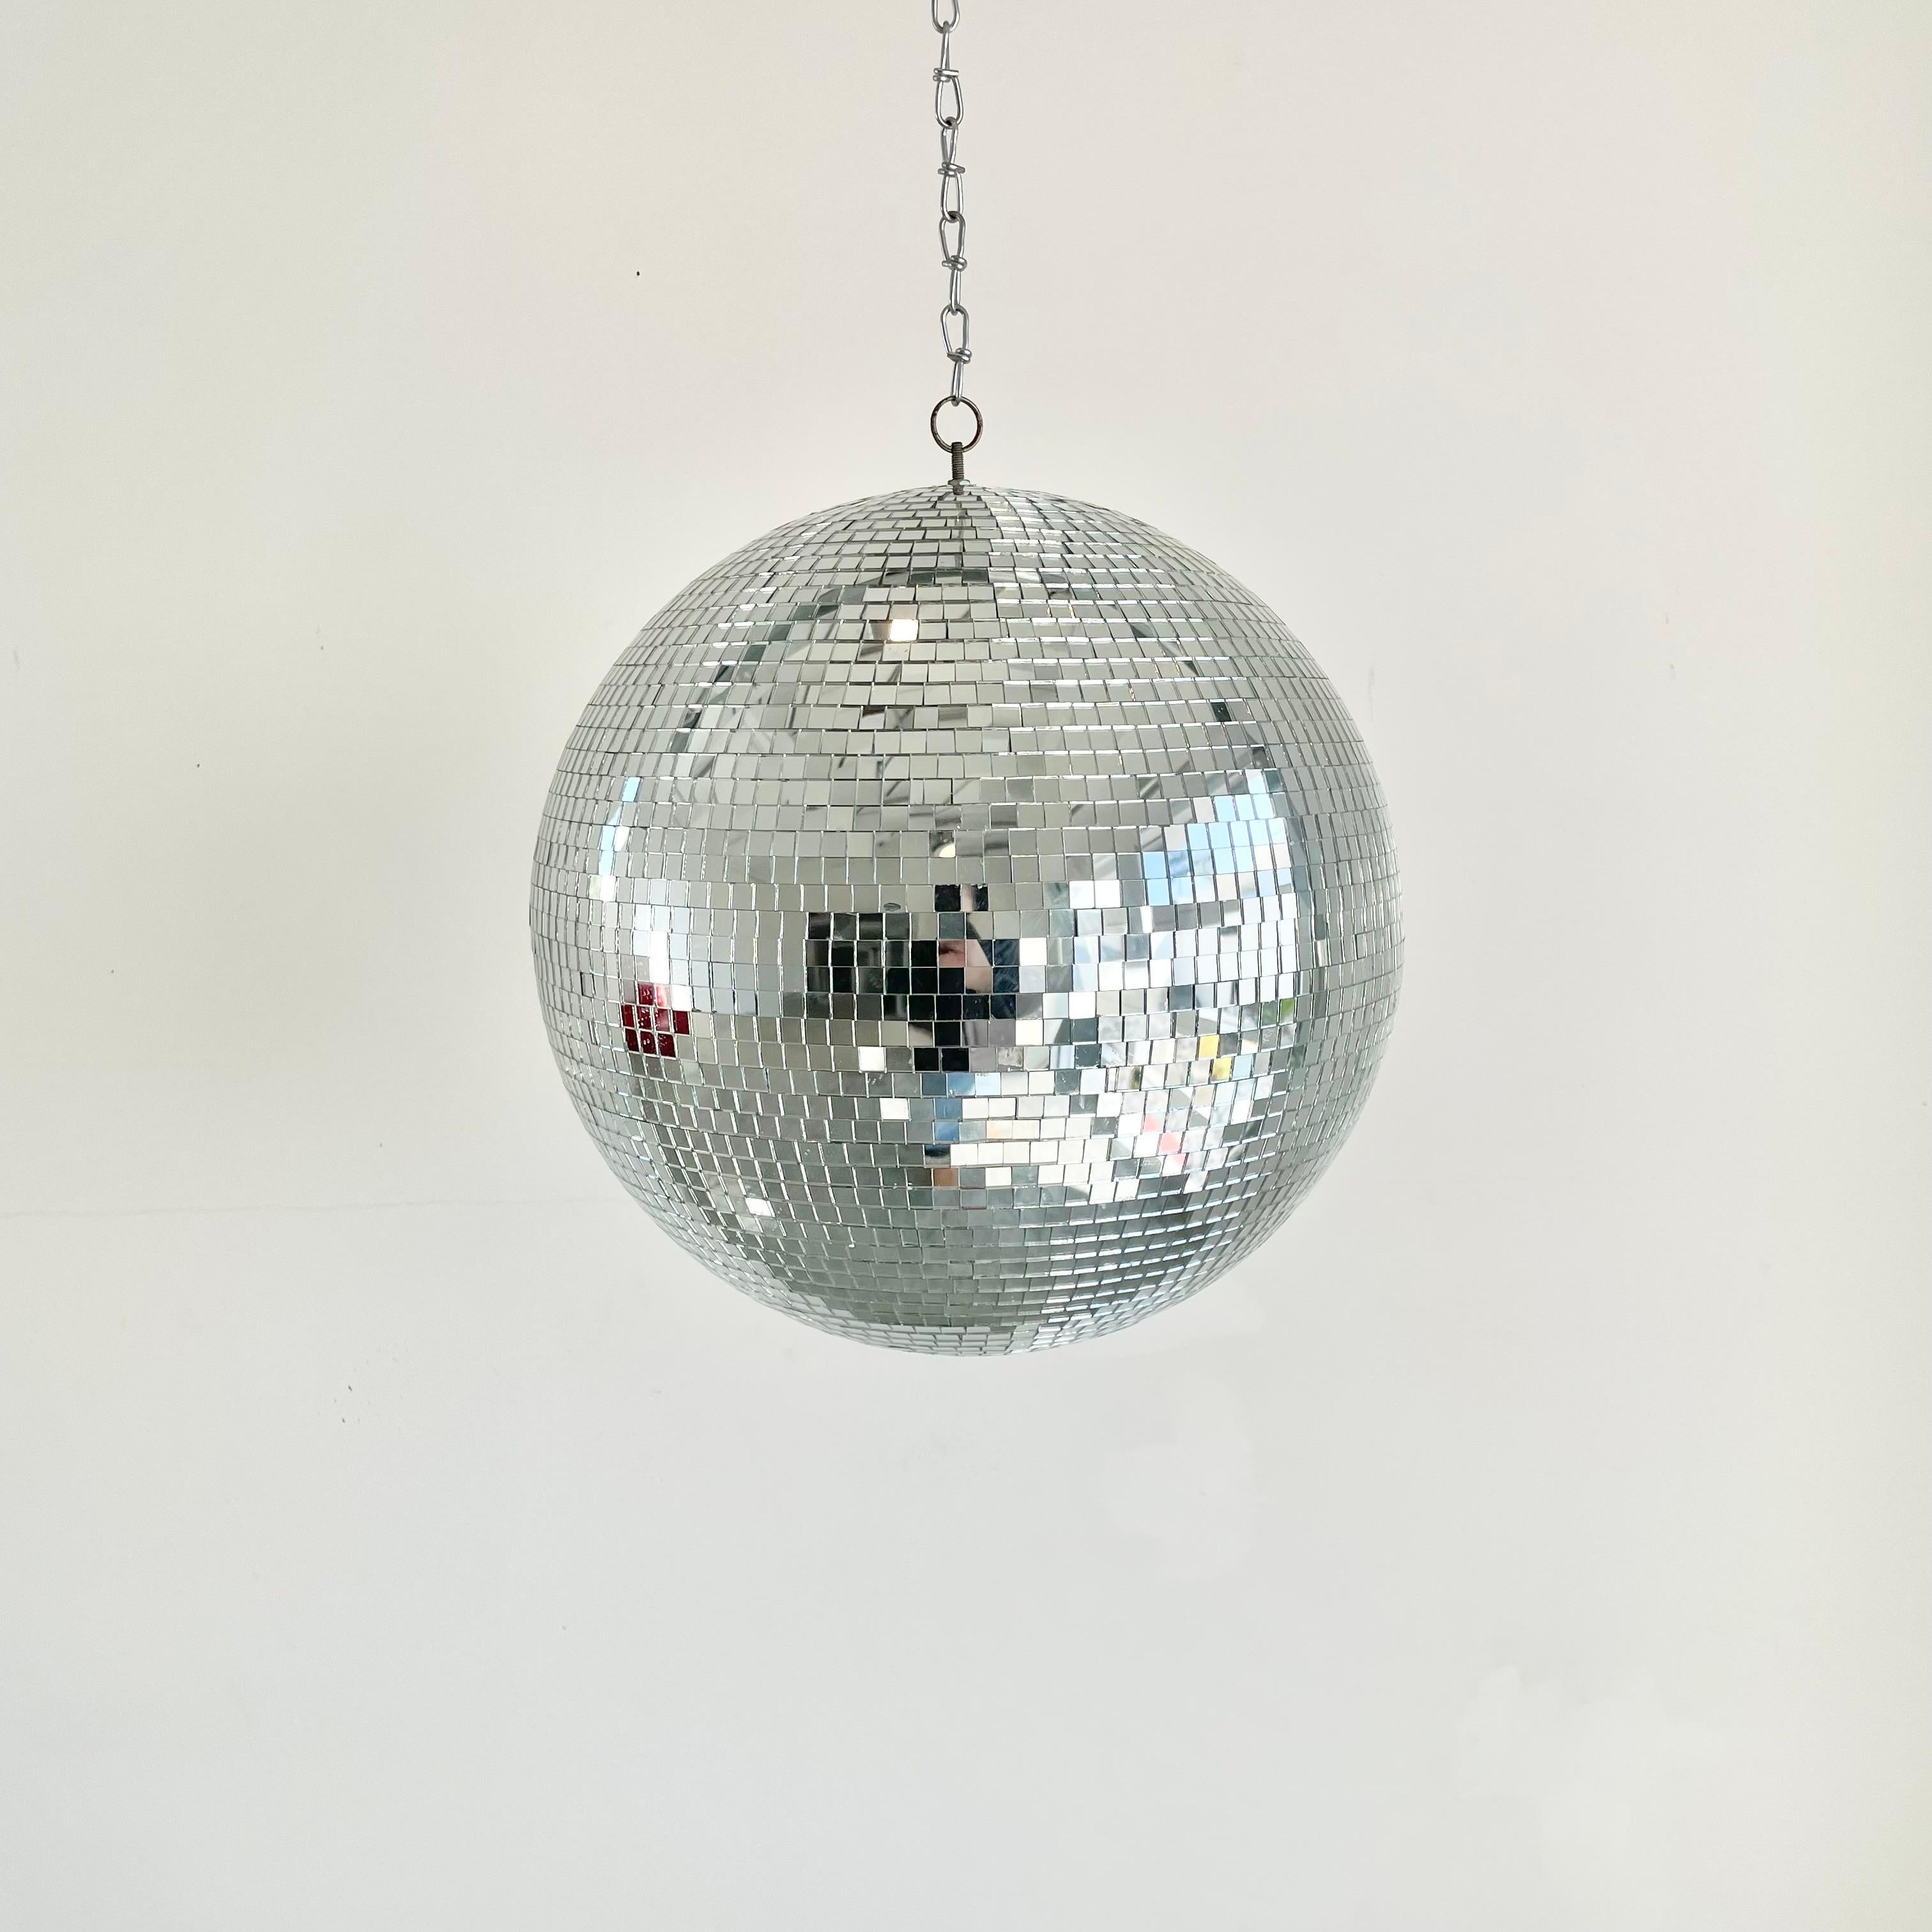 Large retro disco ball made out of small individually cut square pieces of glass giving it a great look. Good condition. Illuminates beautifully. Has a metal ring at the top which is connected to a 1.5 foot long silver chain link which can be taken